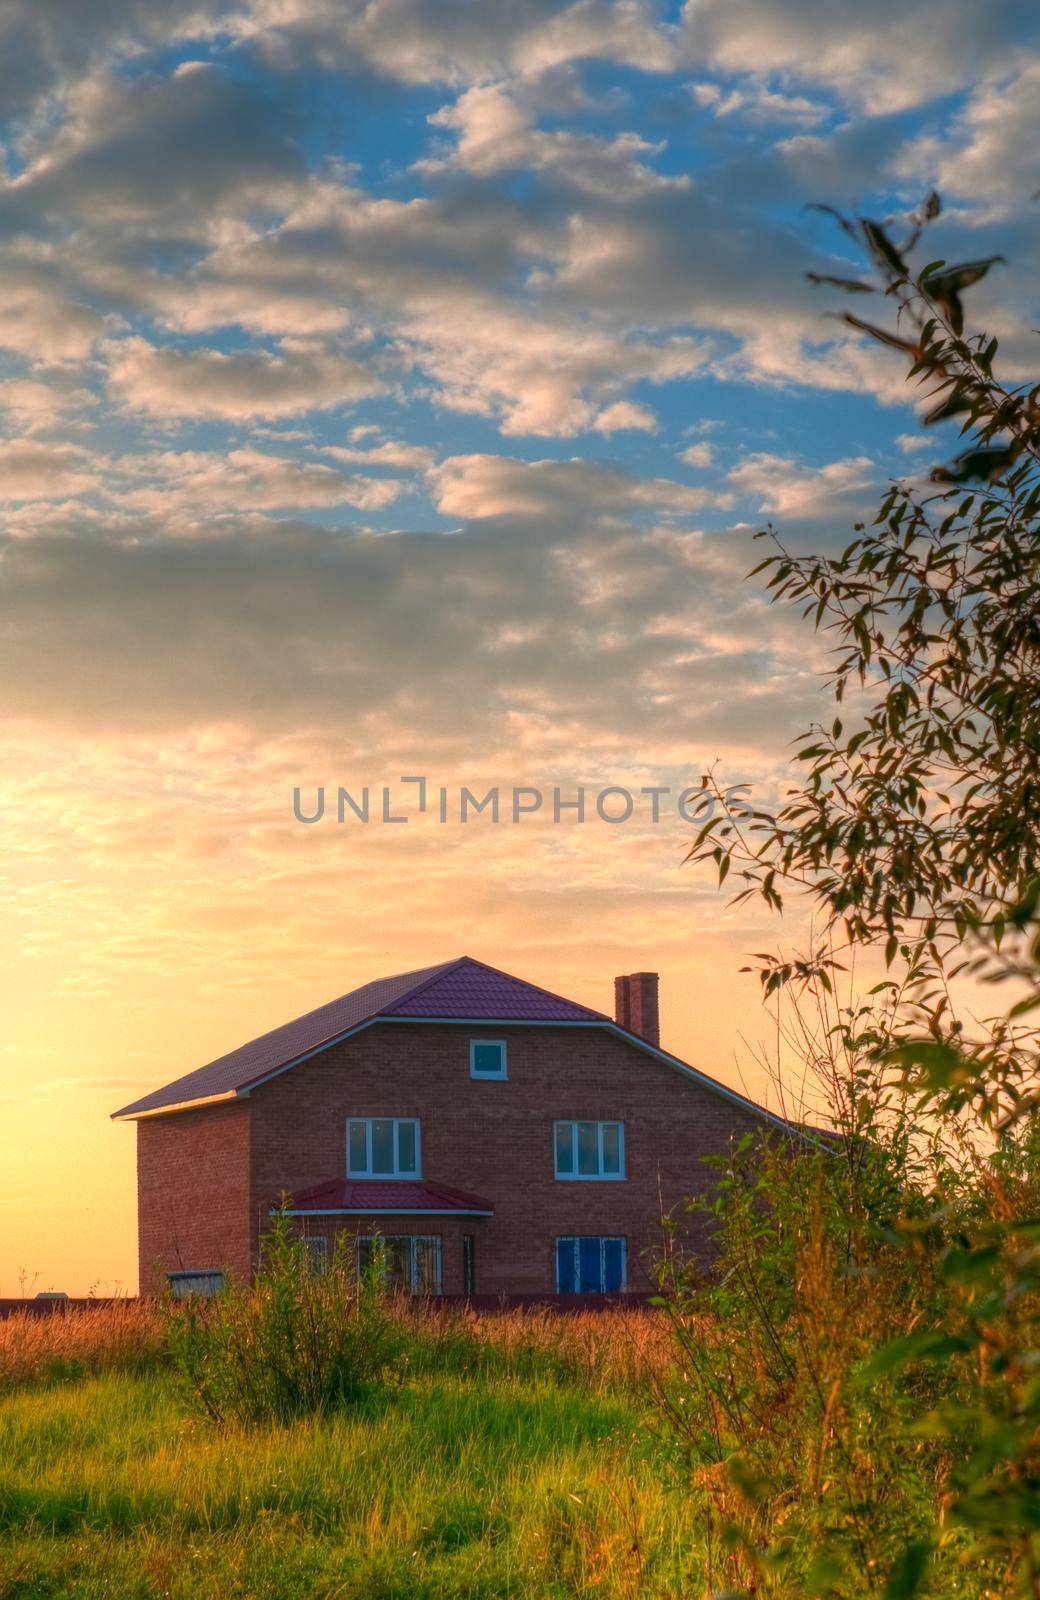 red brick house in the field of yellow flowers with cloudy sky in background